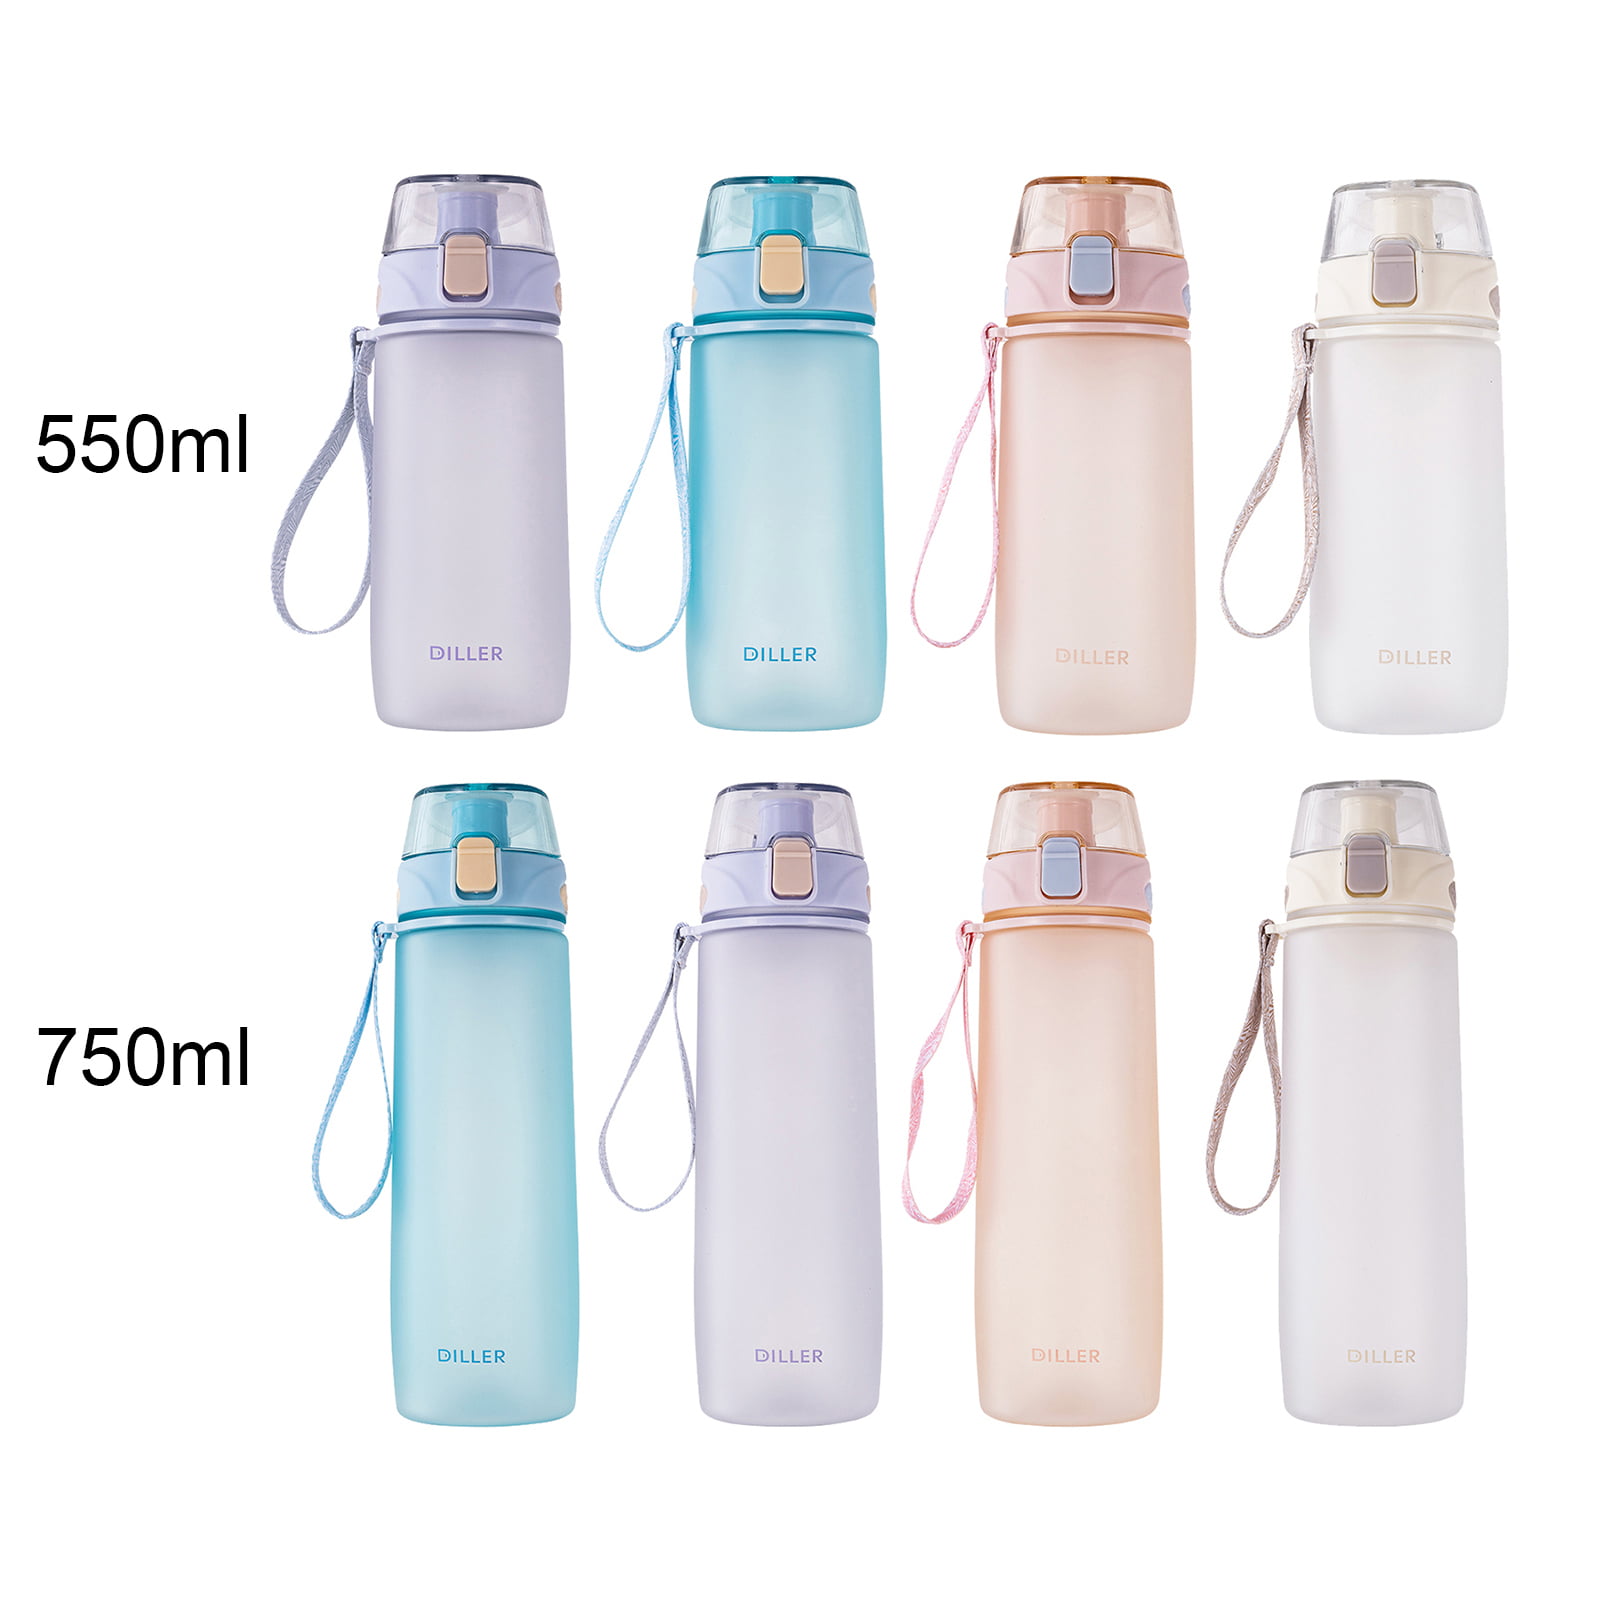 Square Water Bottle With Strap, Large Capacity Sports Bottle For Men And  Women, Lightweight Plastic Gym Bottle 750ml White/black/green/grey